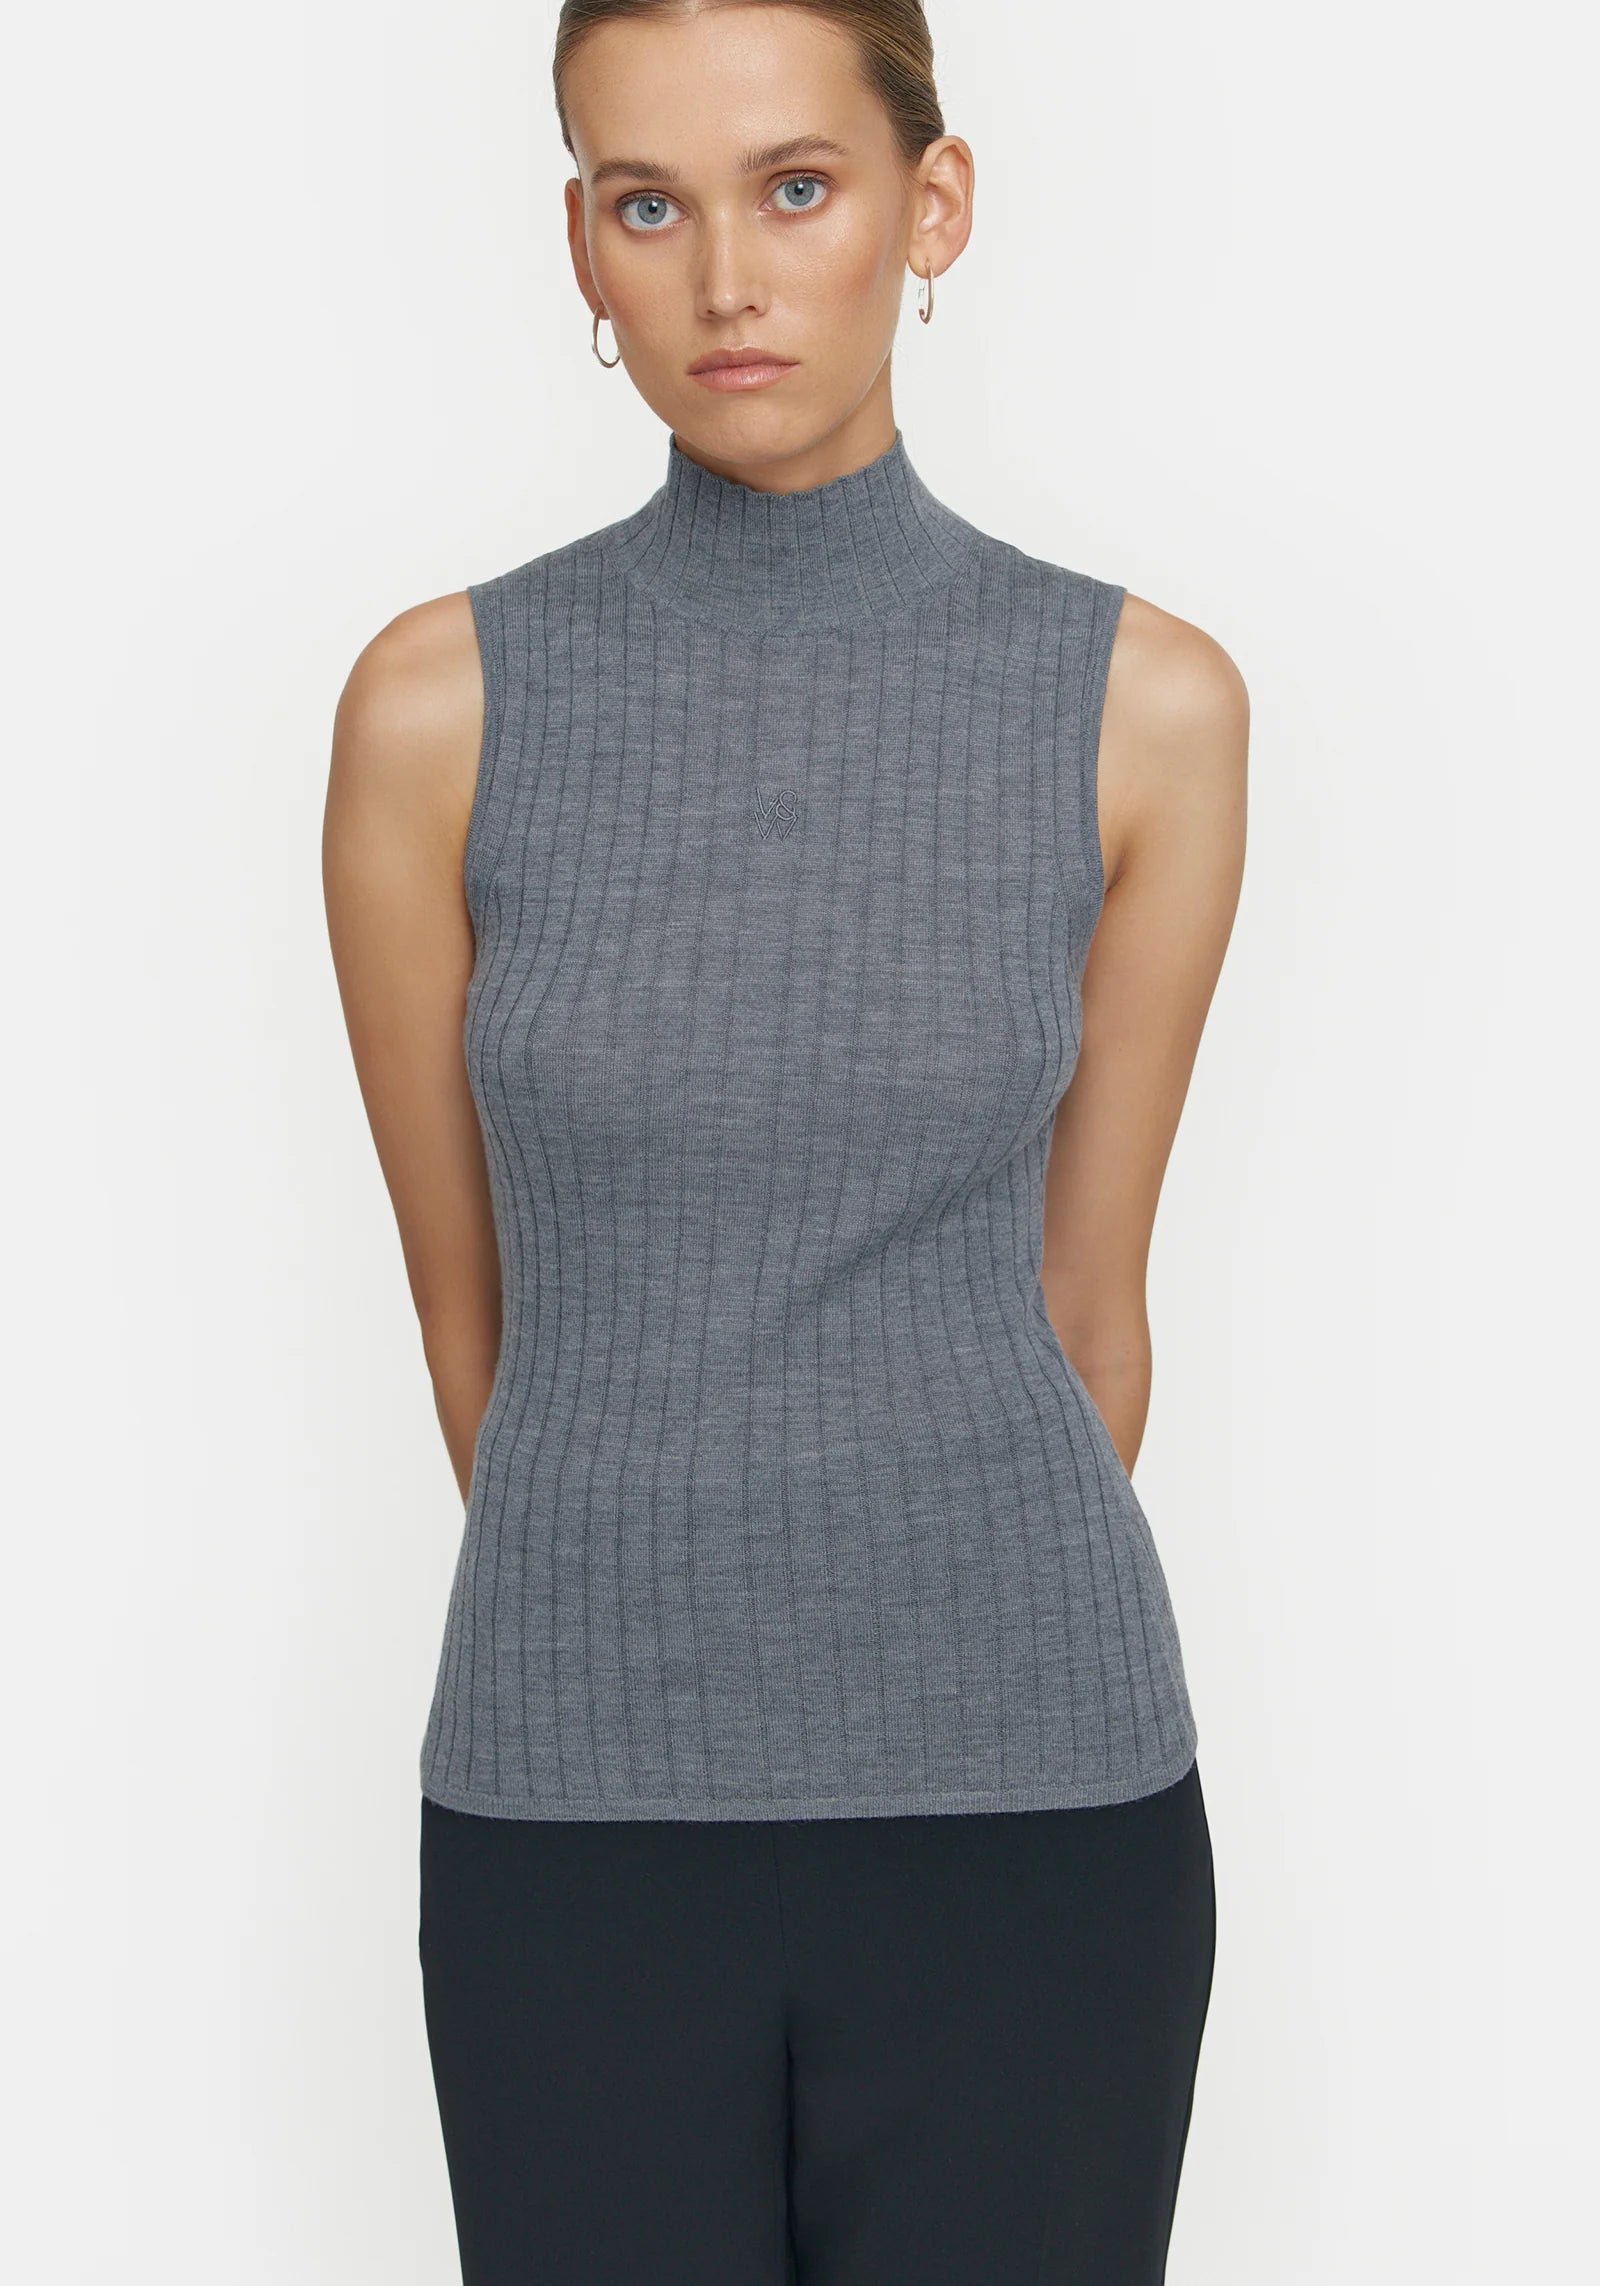 Justice Sleeveless Top - Charcoal Marl